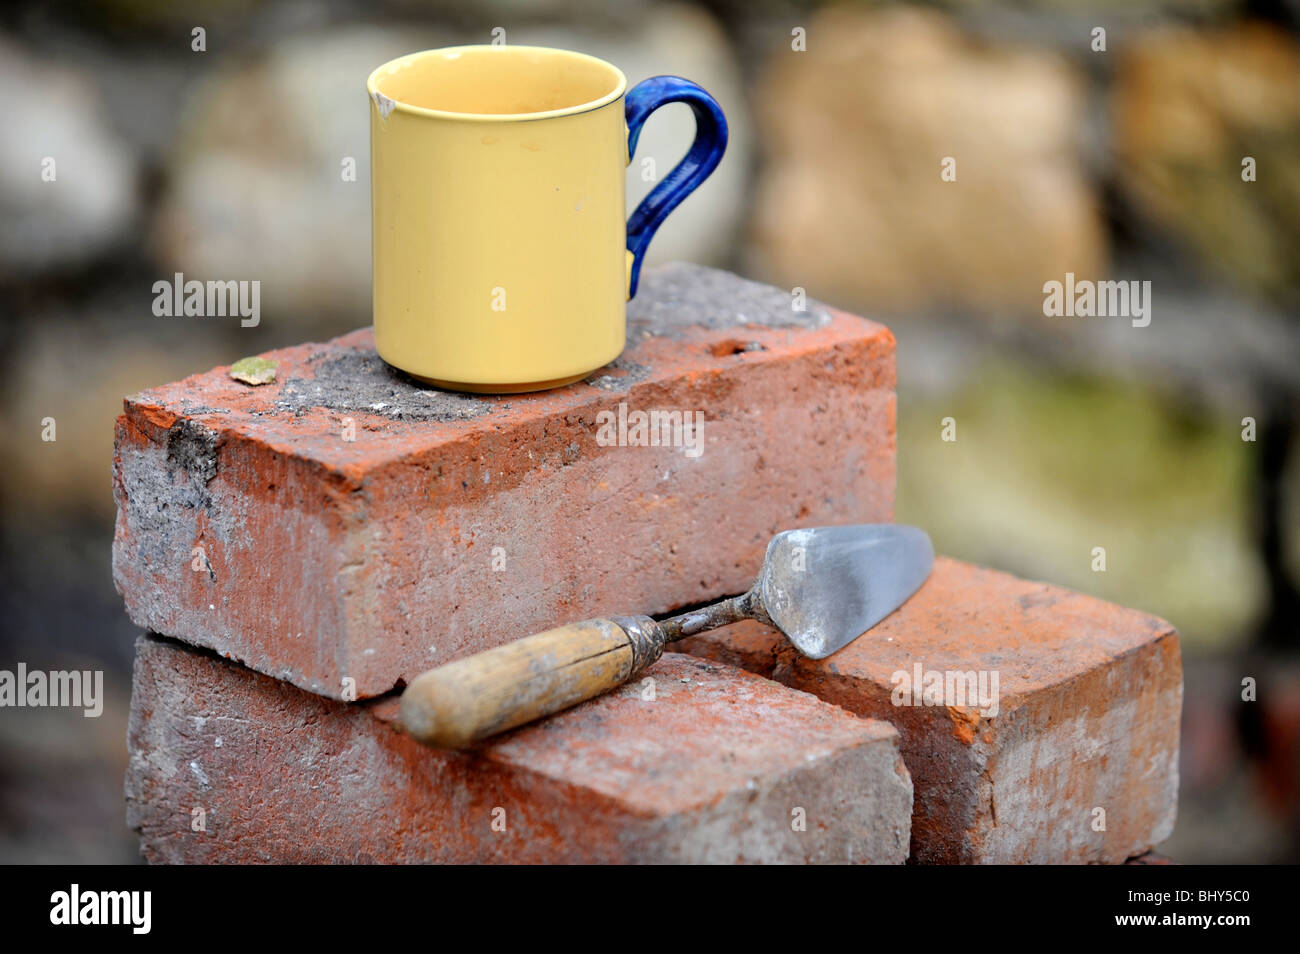 A builders mug of tea on a stack of reclaimed red bricks UK Stock Photo